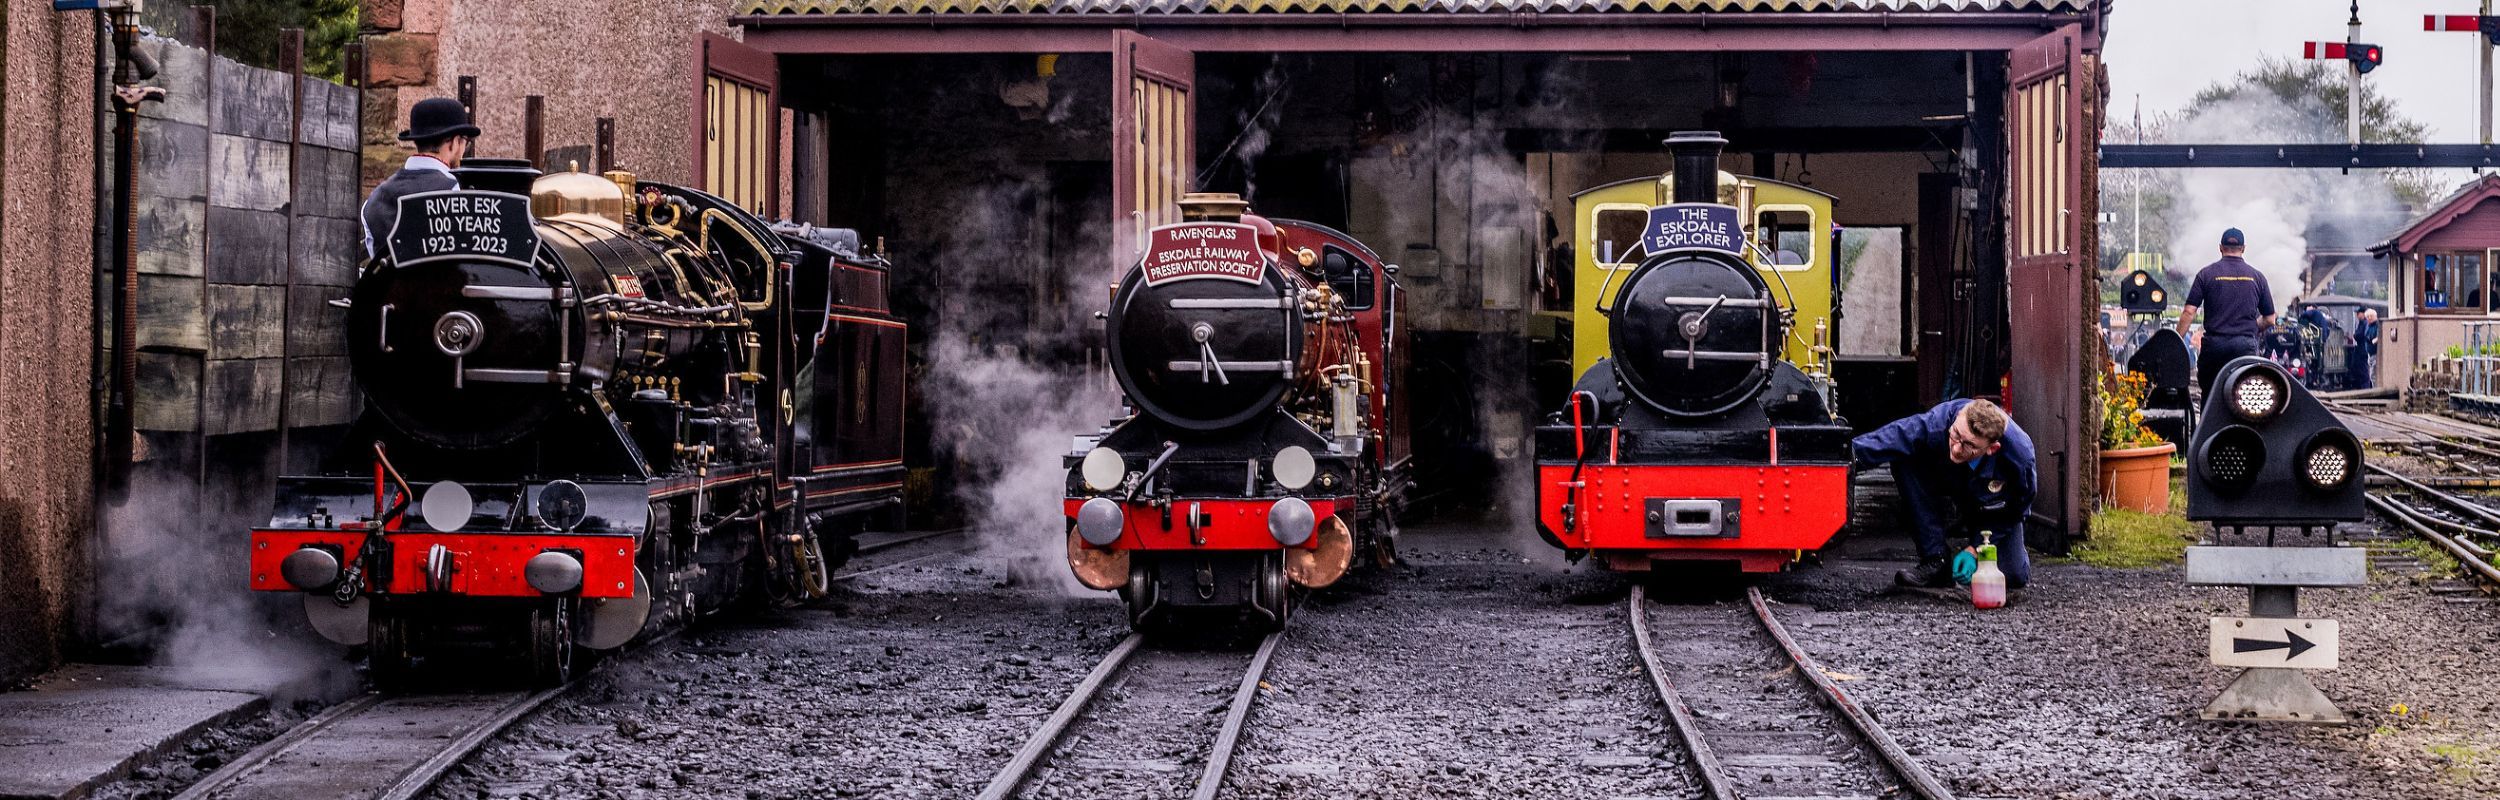 Heritage steam locomotives River Esk, River Mite and Northern Rock in the engine sheds at the Ravenglass and Eskdale Railway